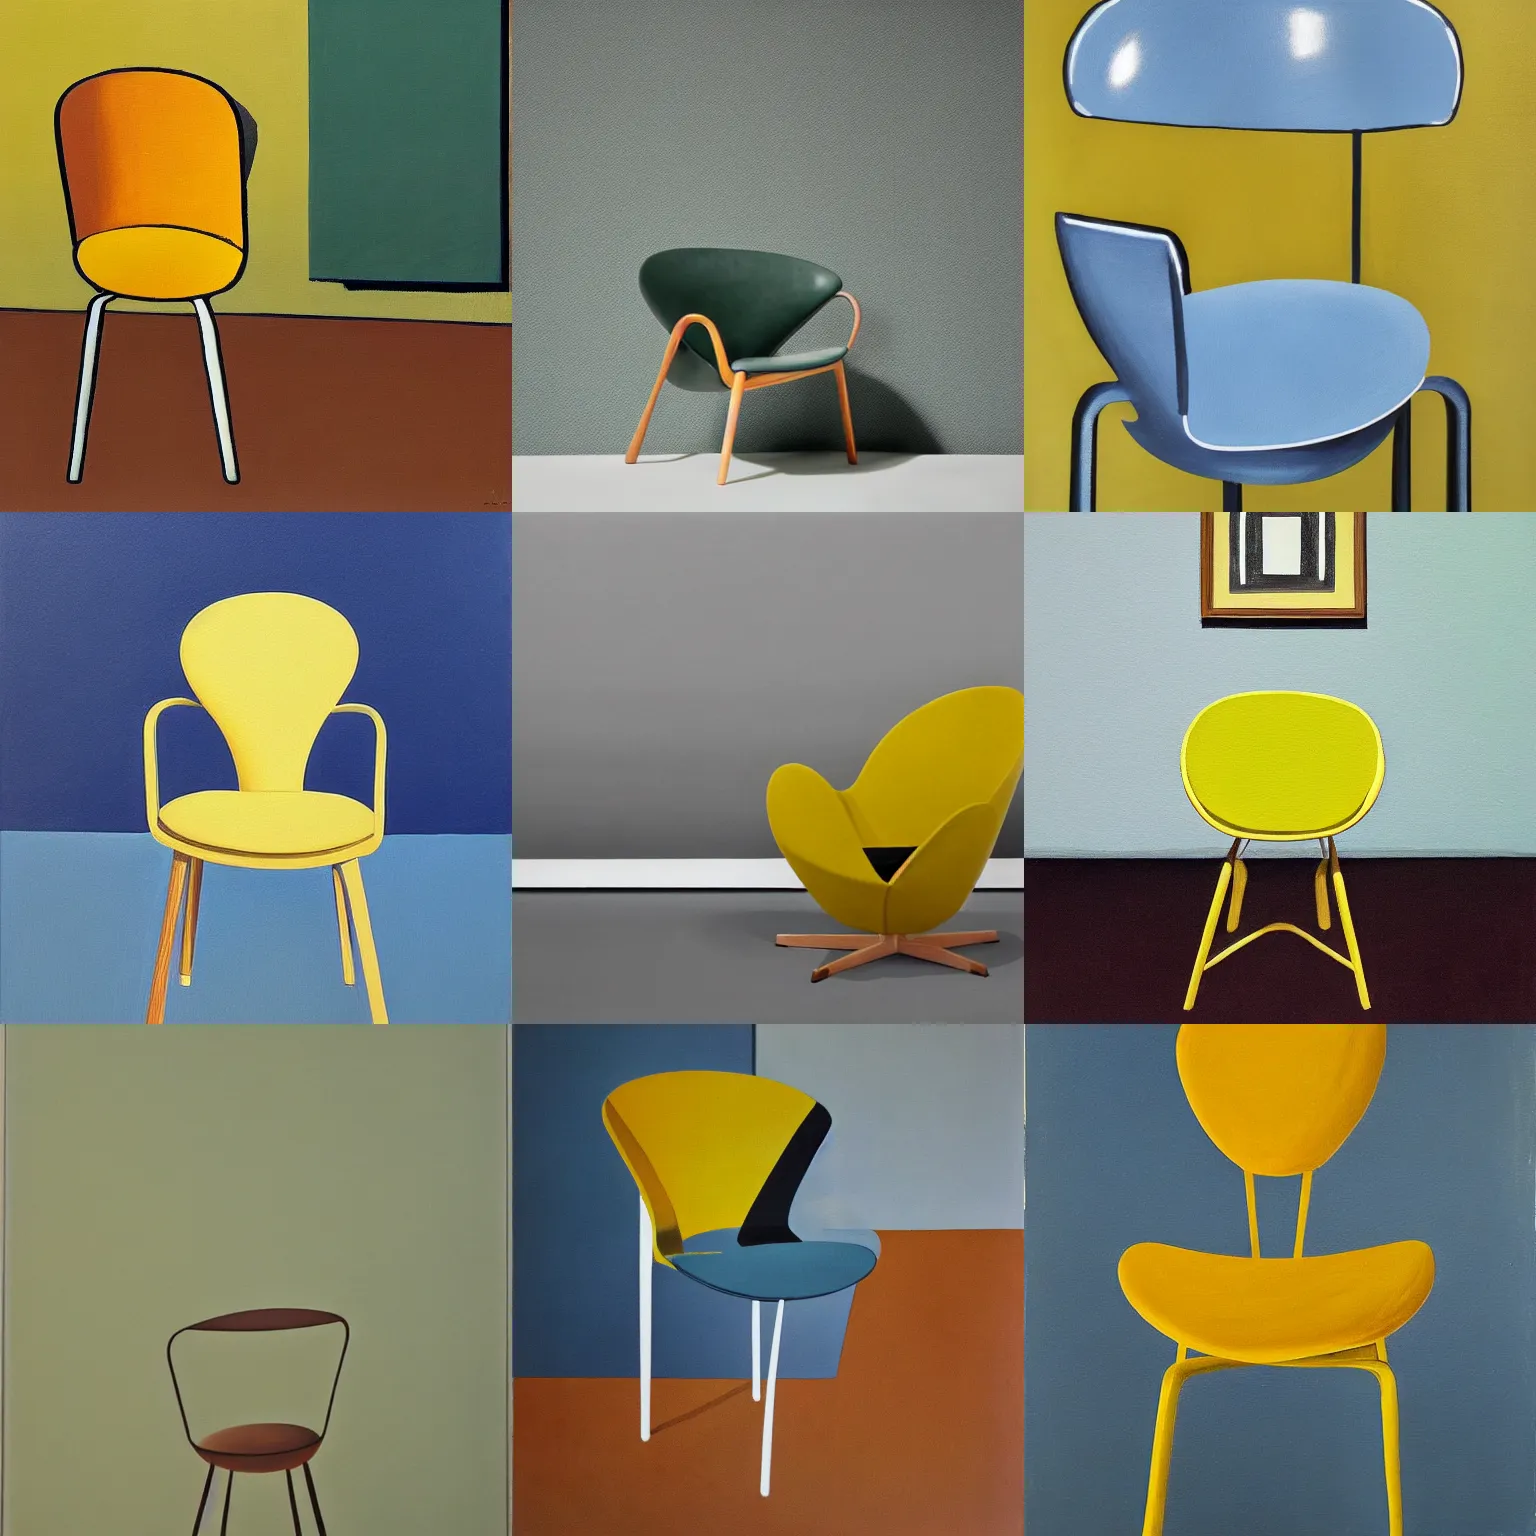 Prompt: A painting by Arne Jacobsen of a chair in the form of a banana